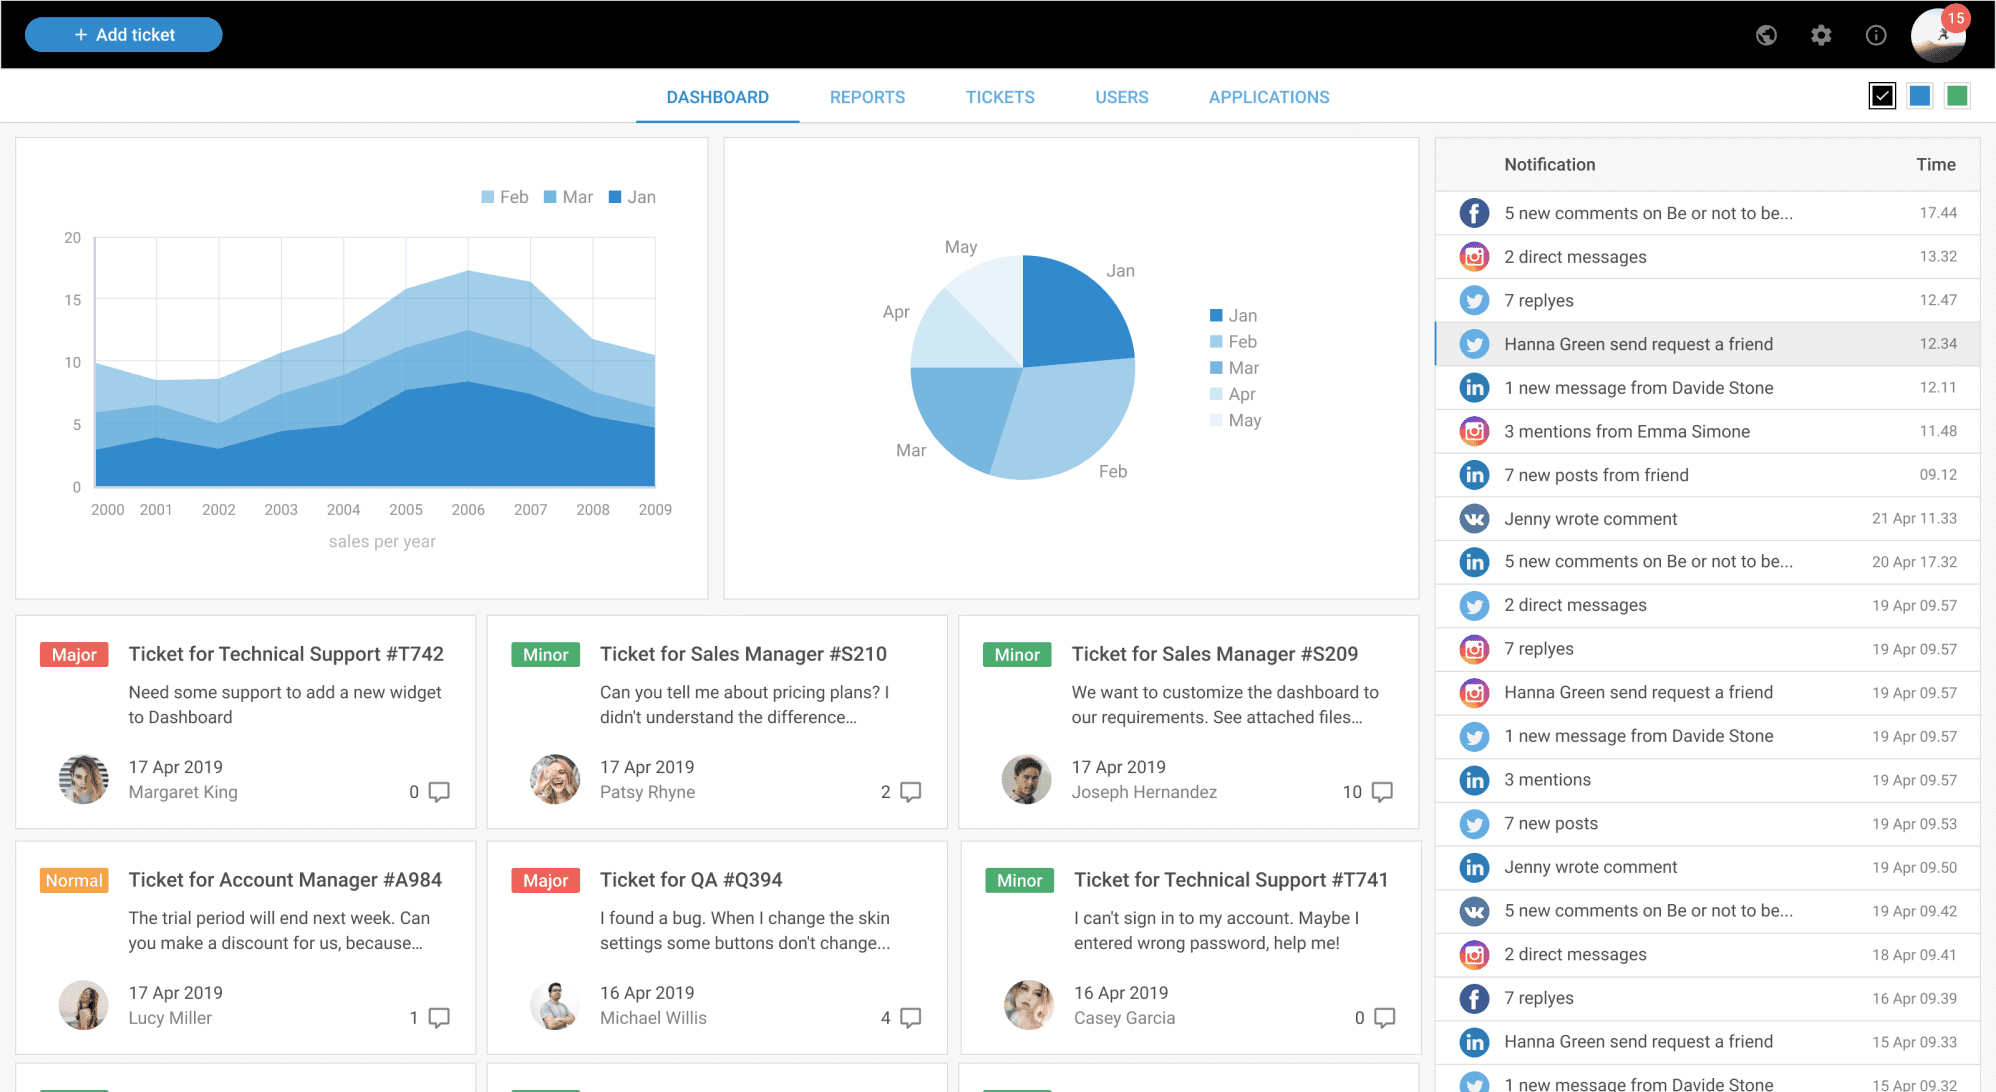 DHTMLX widgets are a perfect foundation for a business dashboard visualizing sales, martketing, help desk, and any other metrics and activities.